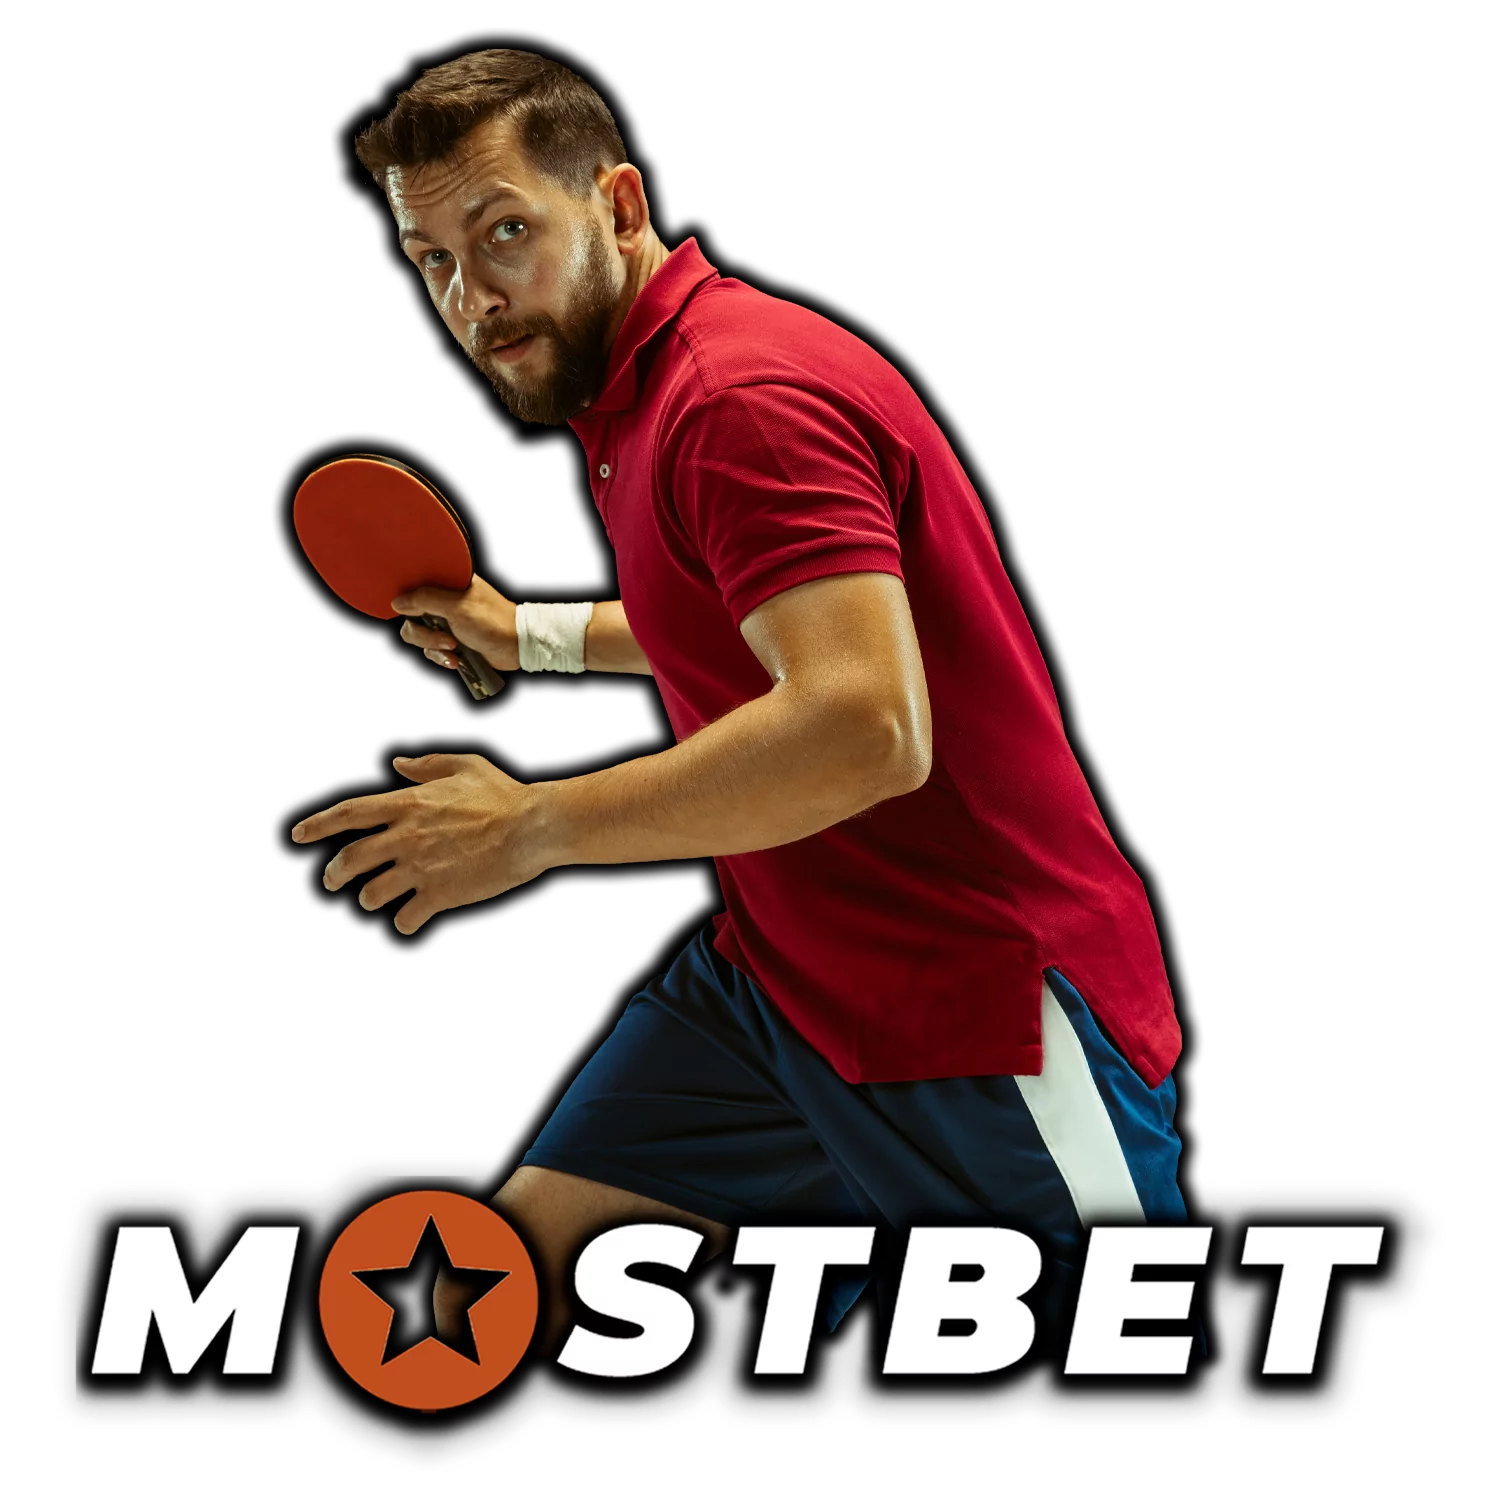 Learn how to place bets on table tennis events at Mostbet.